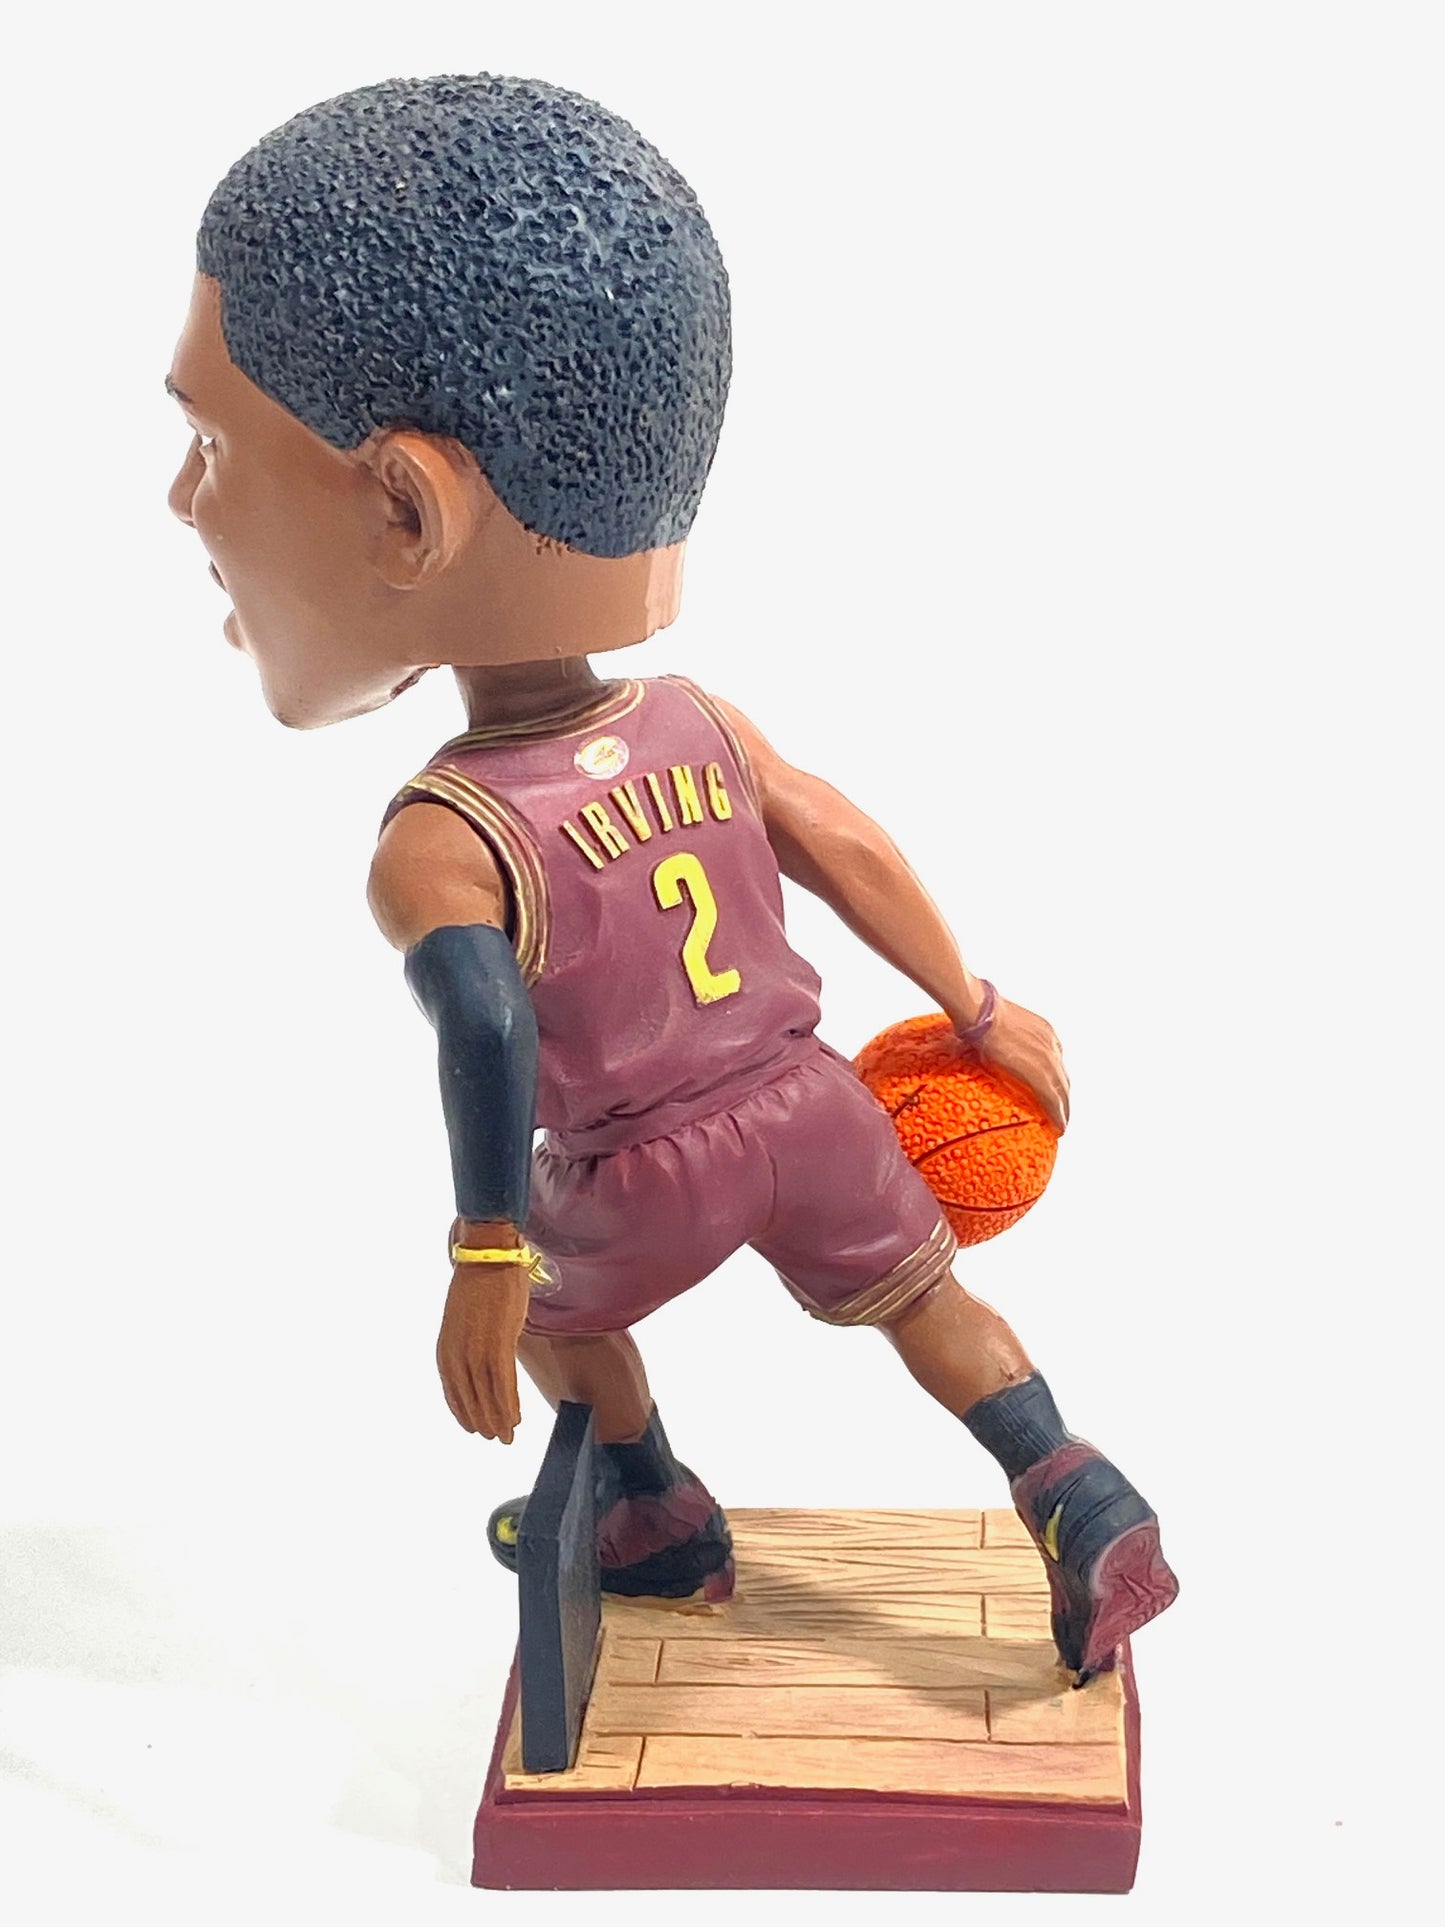 Kyrie Irving 2014 NBA Cleveland Cavaliers Bobblehead (Used) by Cavanaugh Marketing Network